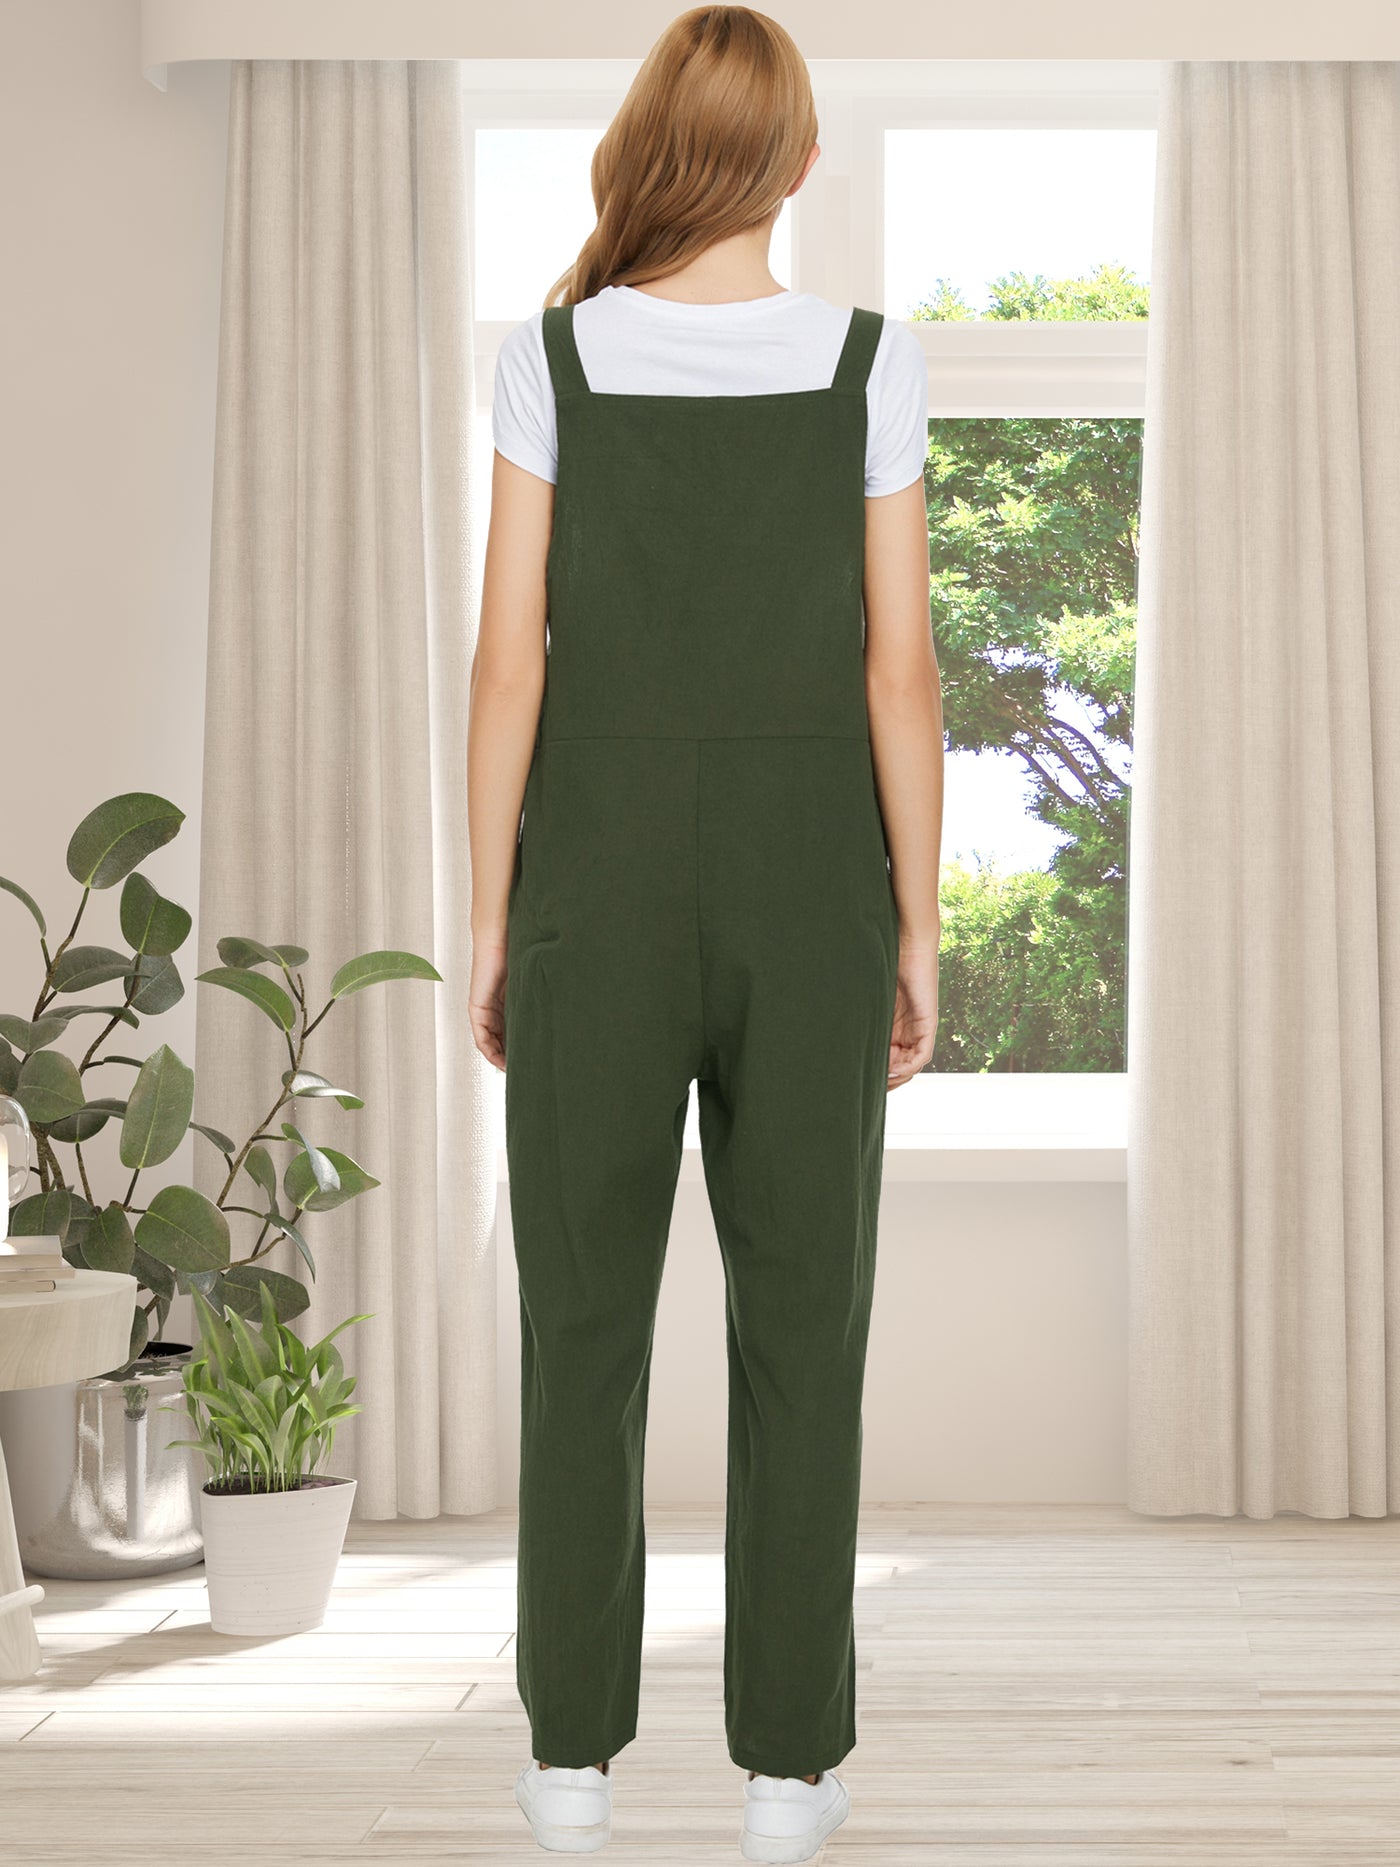 Allegra K Summer Fashion Baggy Loose Cotton Overalls Jumpsuit with Pockets